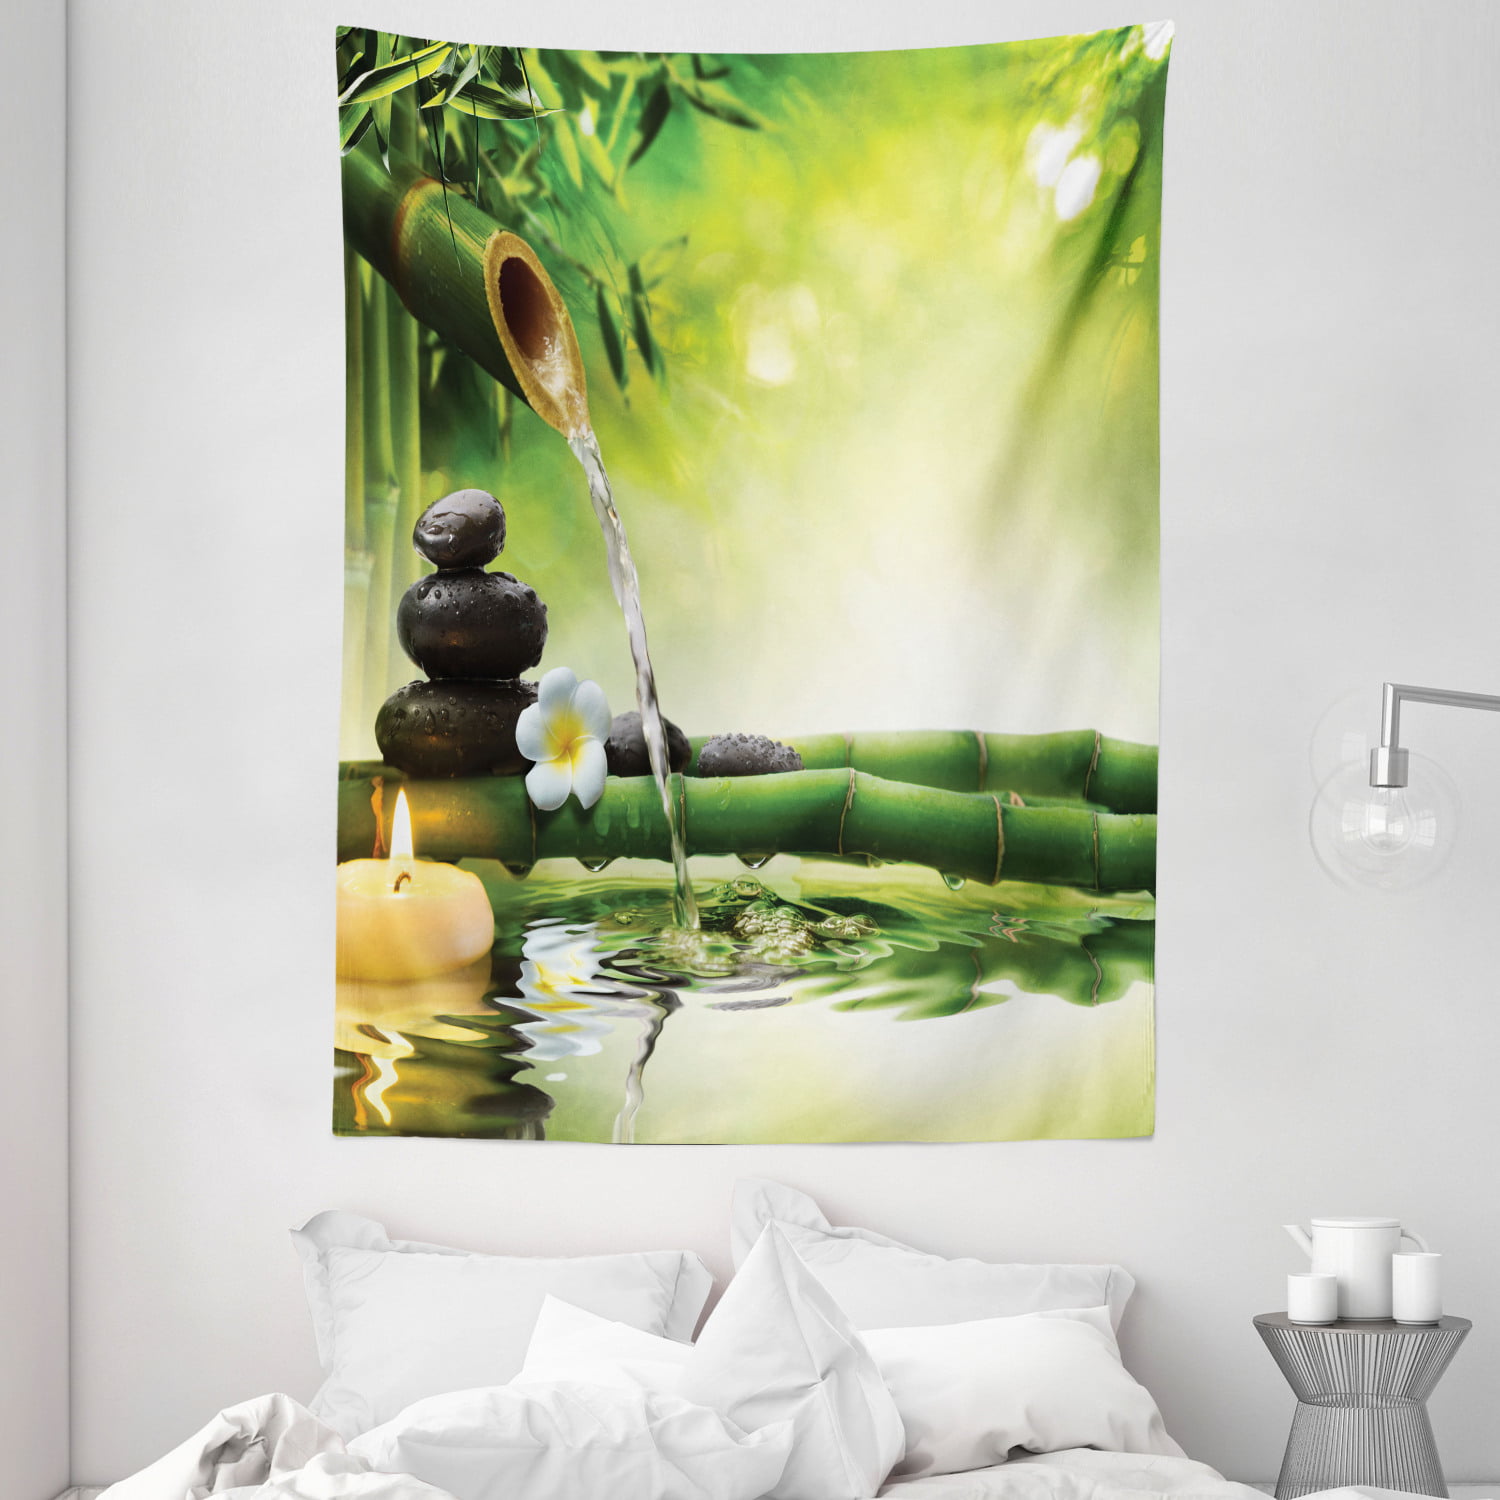 Spa Zen Stone Orchid Bamboo Tapestry Wall Hanging Living Room Bedroom Dorm Decor 